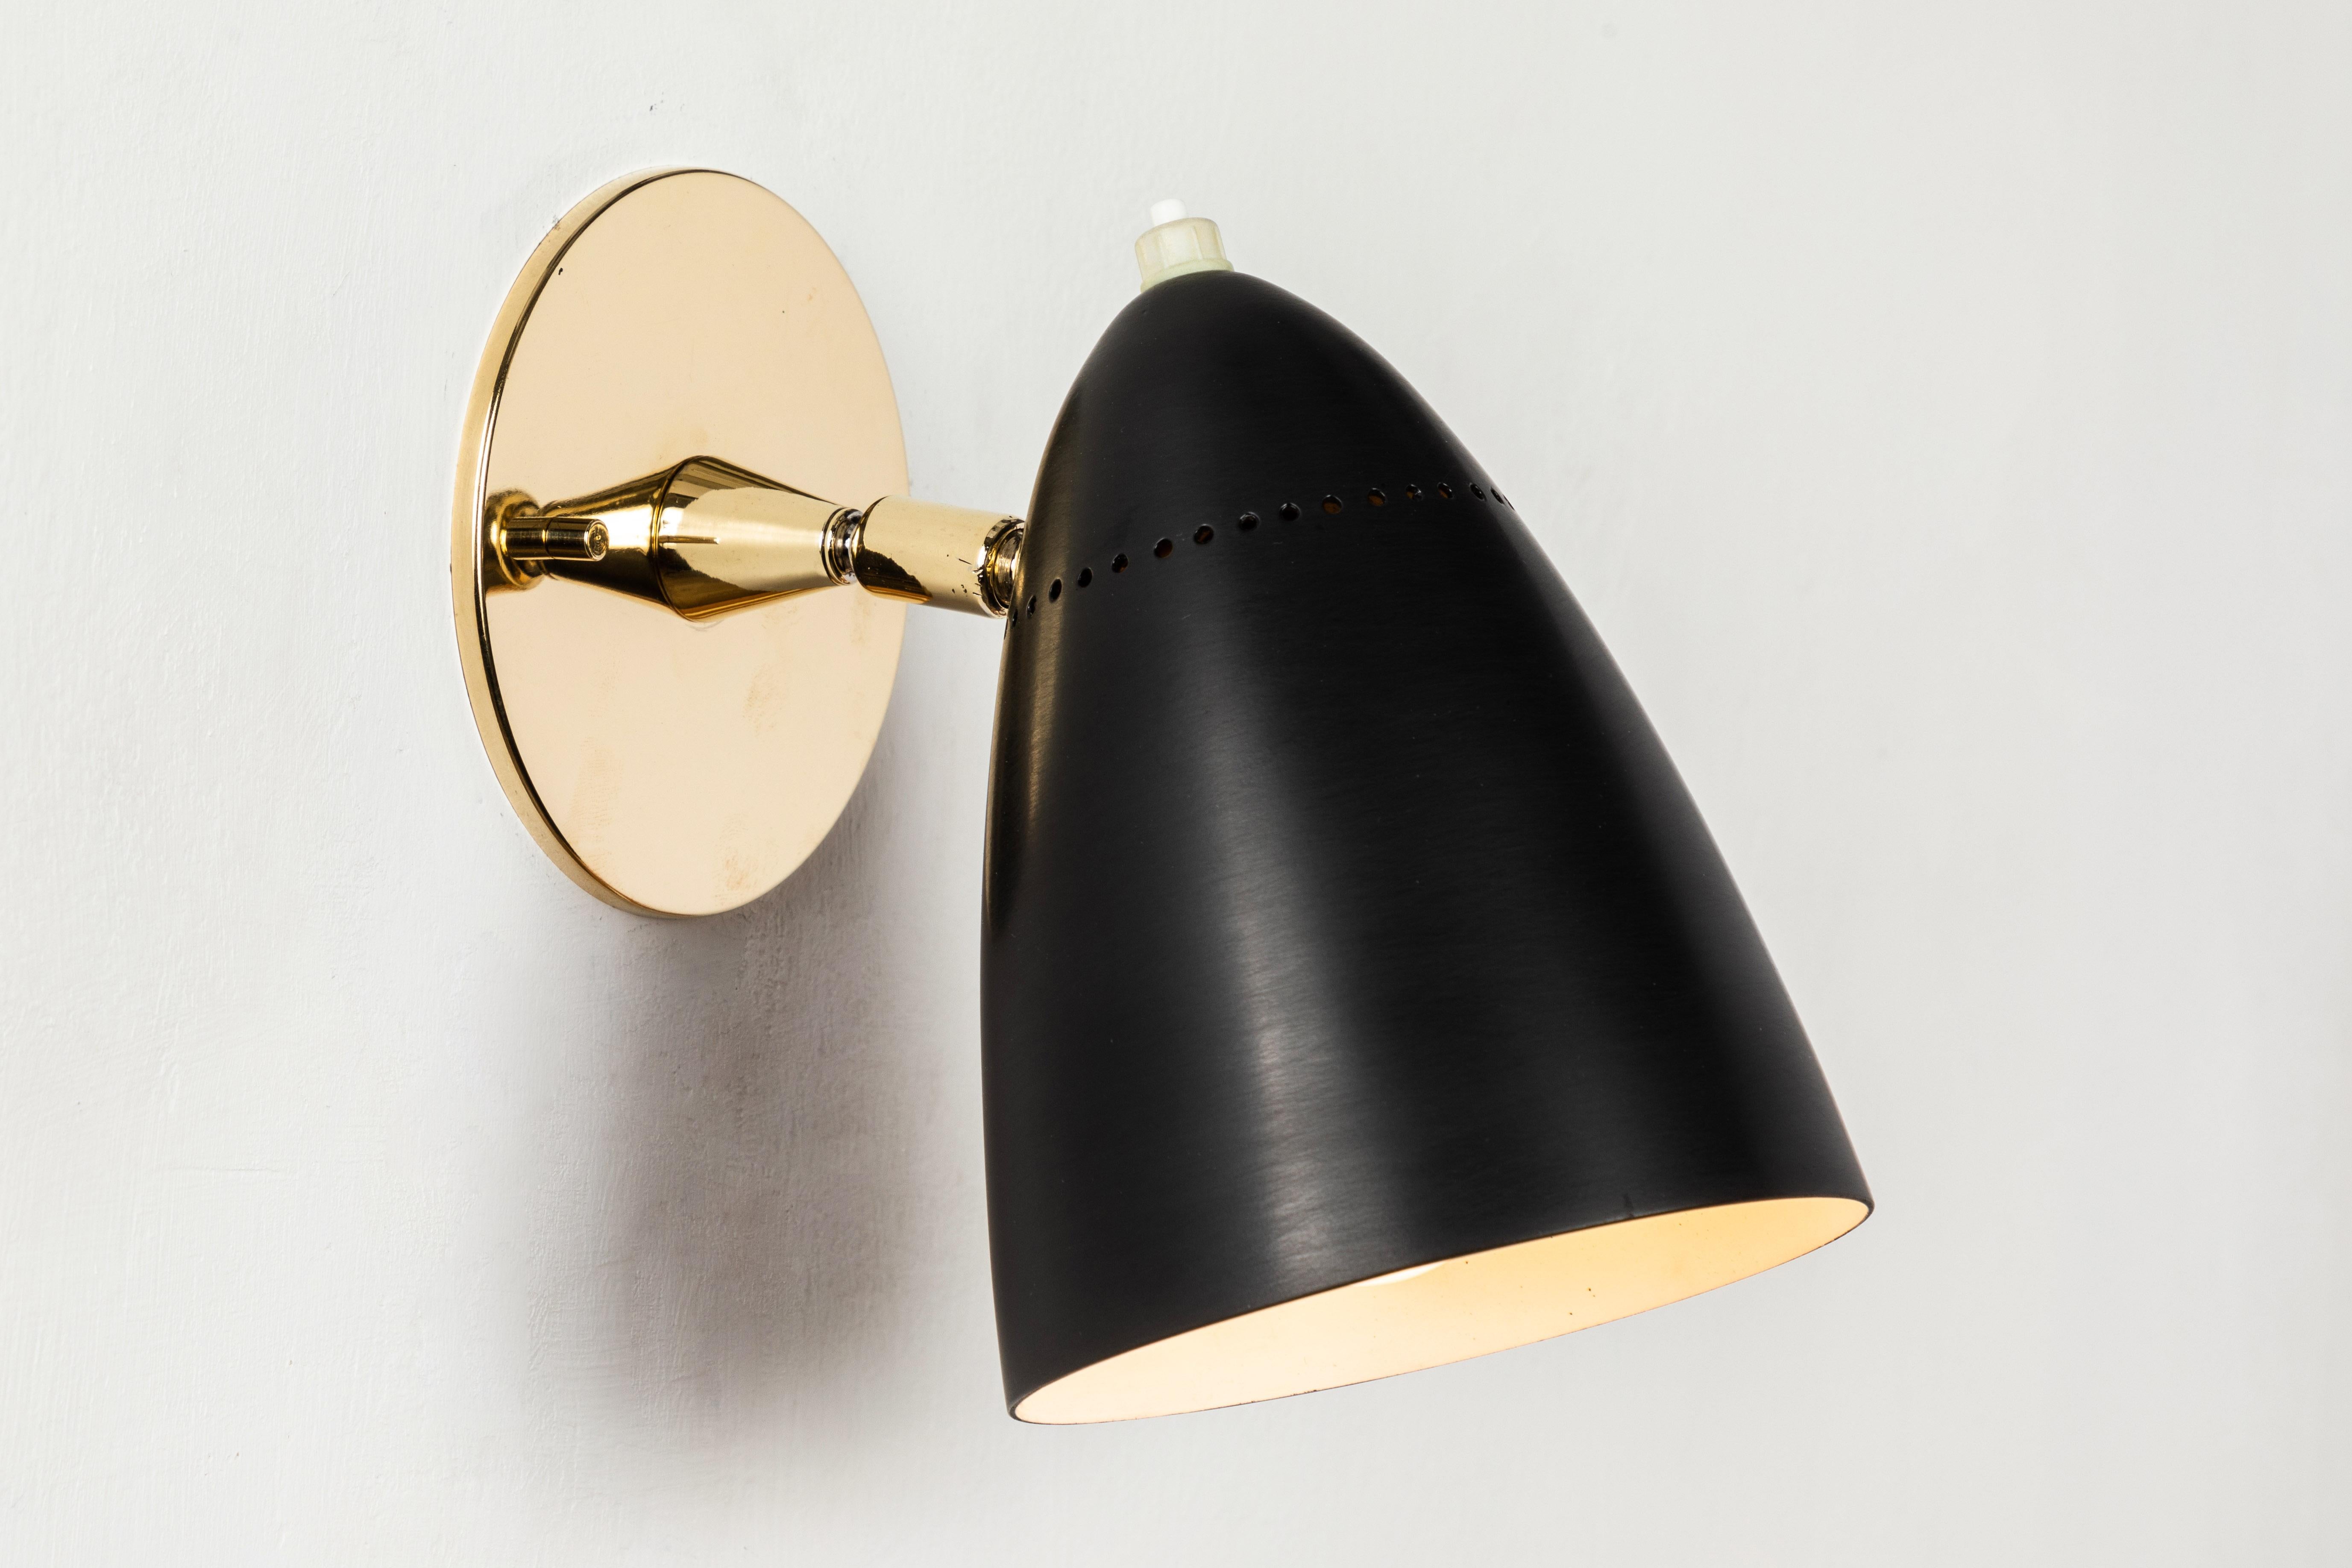 Pair of 1950s sconces by Gino Sarfatti for Arteluce. Executed in black painted aluminum and brass. Double ball jointed arm allows flexible shade adjustments and multiple configurations. The simplicity of Sarfatti's design and the sculptural shaping